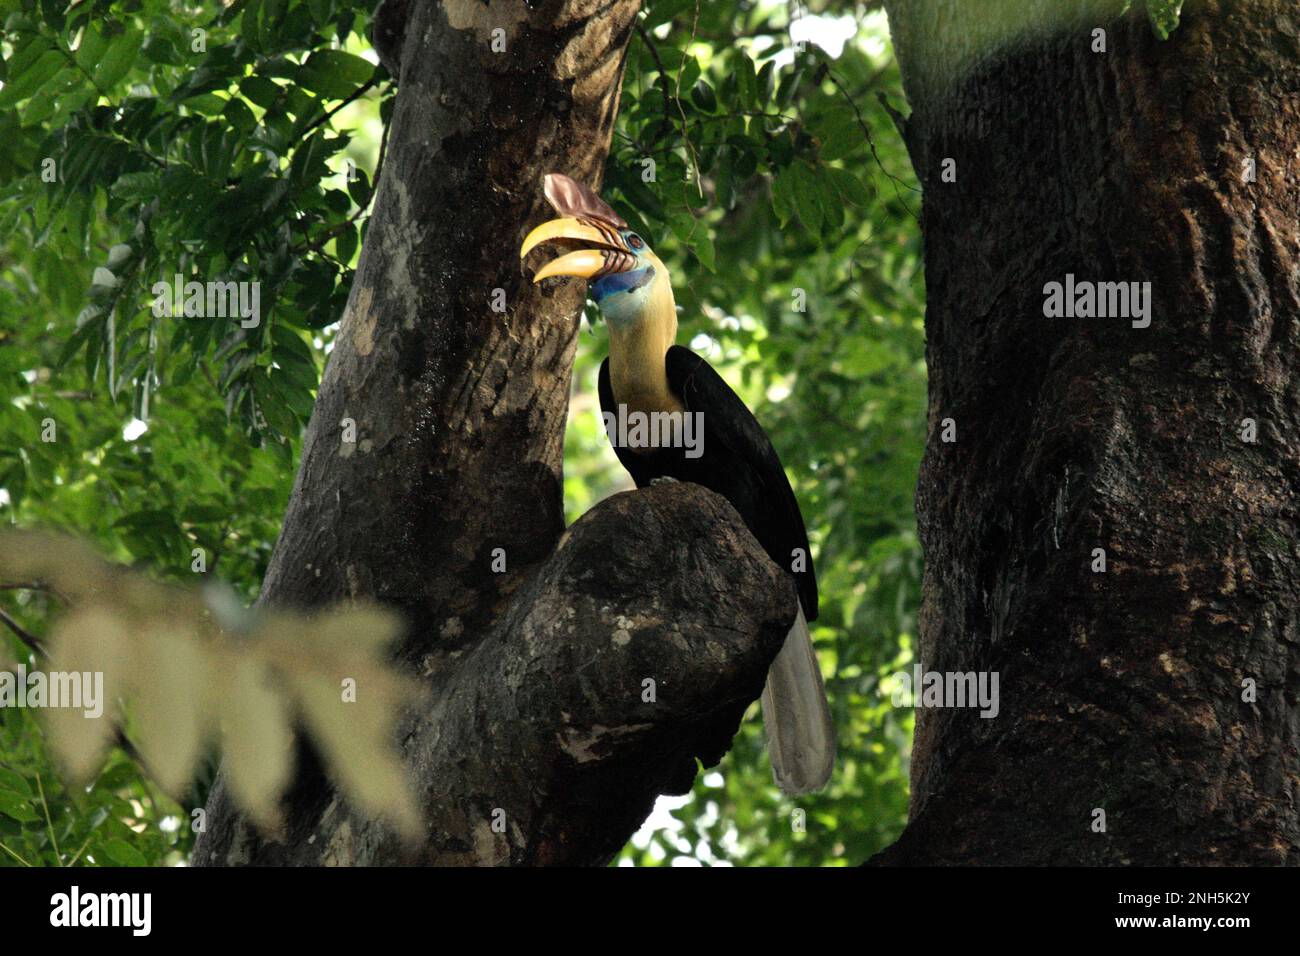 A male individual of knobbed hornbill, or sometimes called Sulawesi wrinkled hornbill (Rhyticeros cassidix), is photographed as it is perching on a tree in Tangkoko Nature Reserve, North Sulawesi, Indonesia. The species is currently considered vulnerable to extinction due to logging and hunting, according to Amanda Hackett of Wildlife Conservation Society in a 2022 publication. 'With trees diminishing, there are no safe places for hornbill pairs to build their nests in large mature trees,' she added. Stock Photo